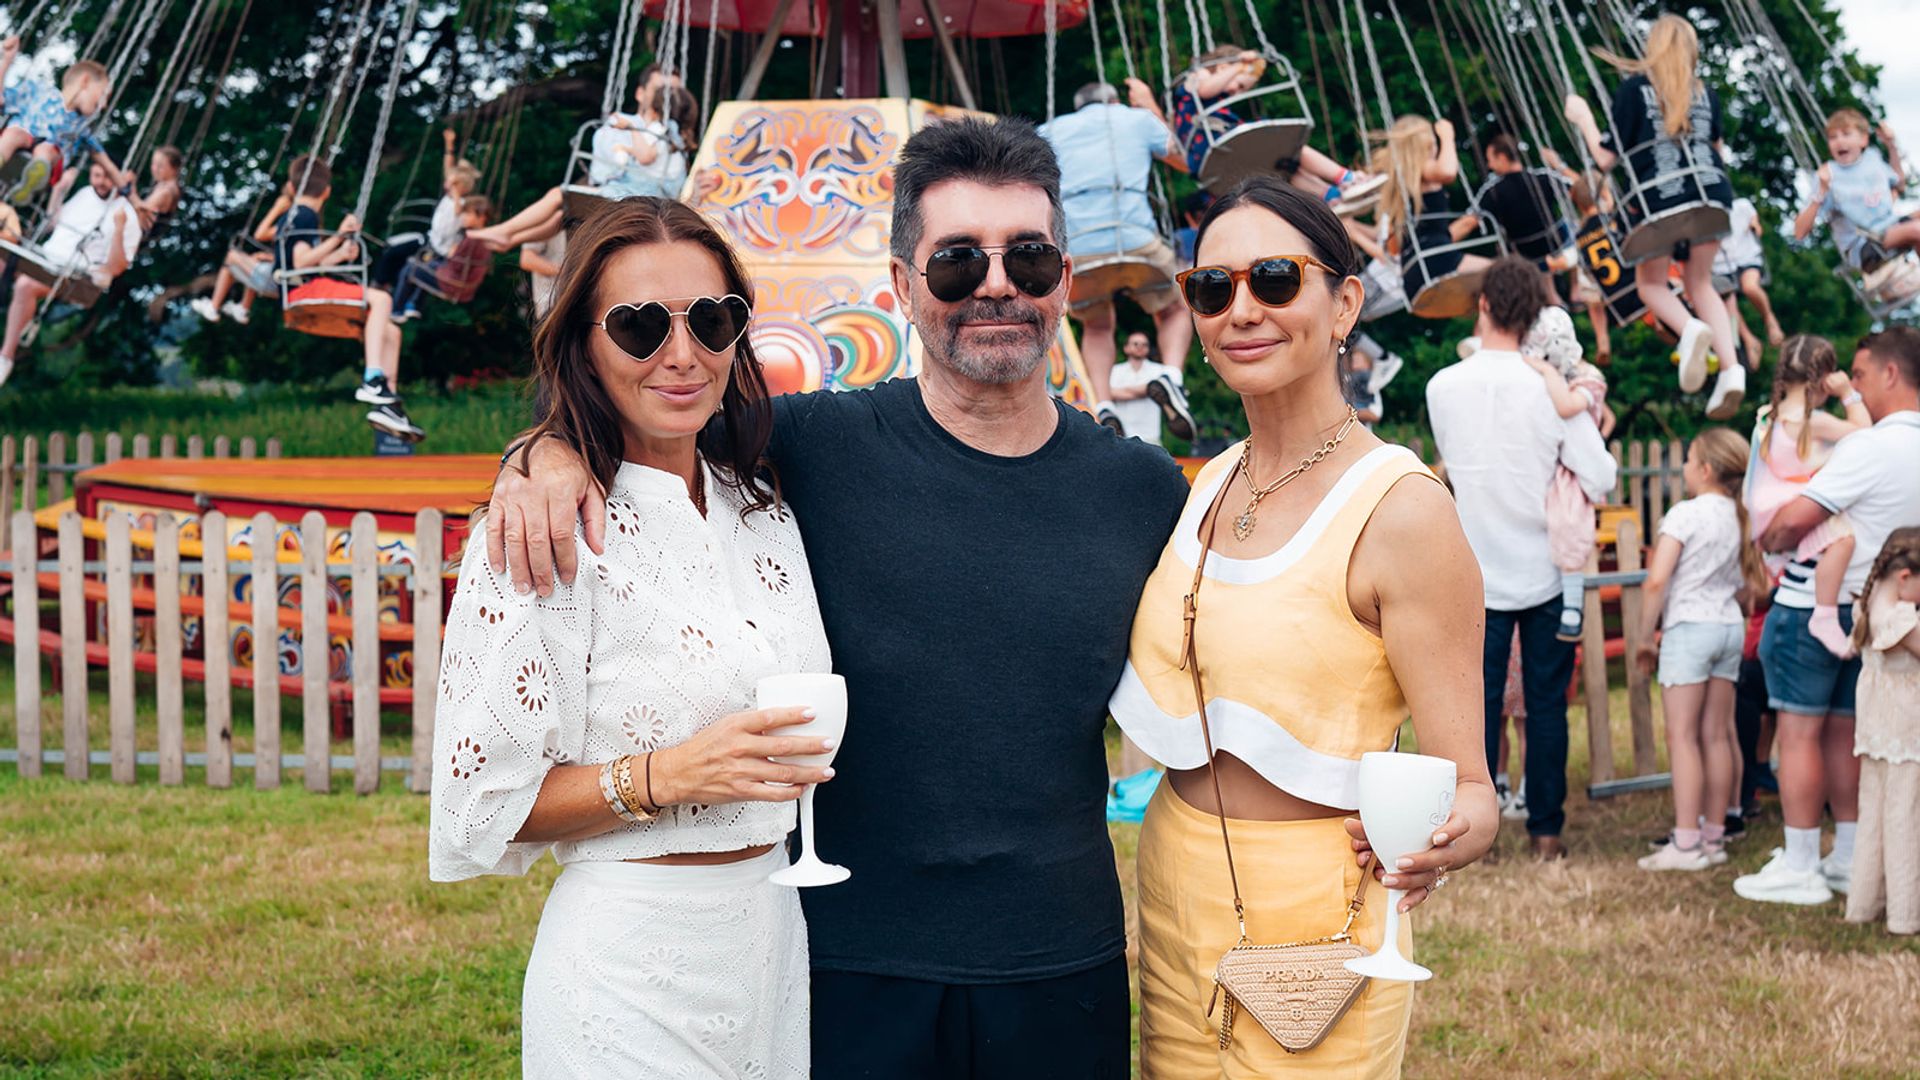 Simon Cowell and Lauren Silverman in front of a fair ground ride